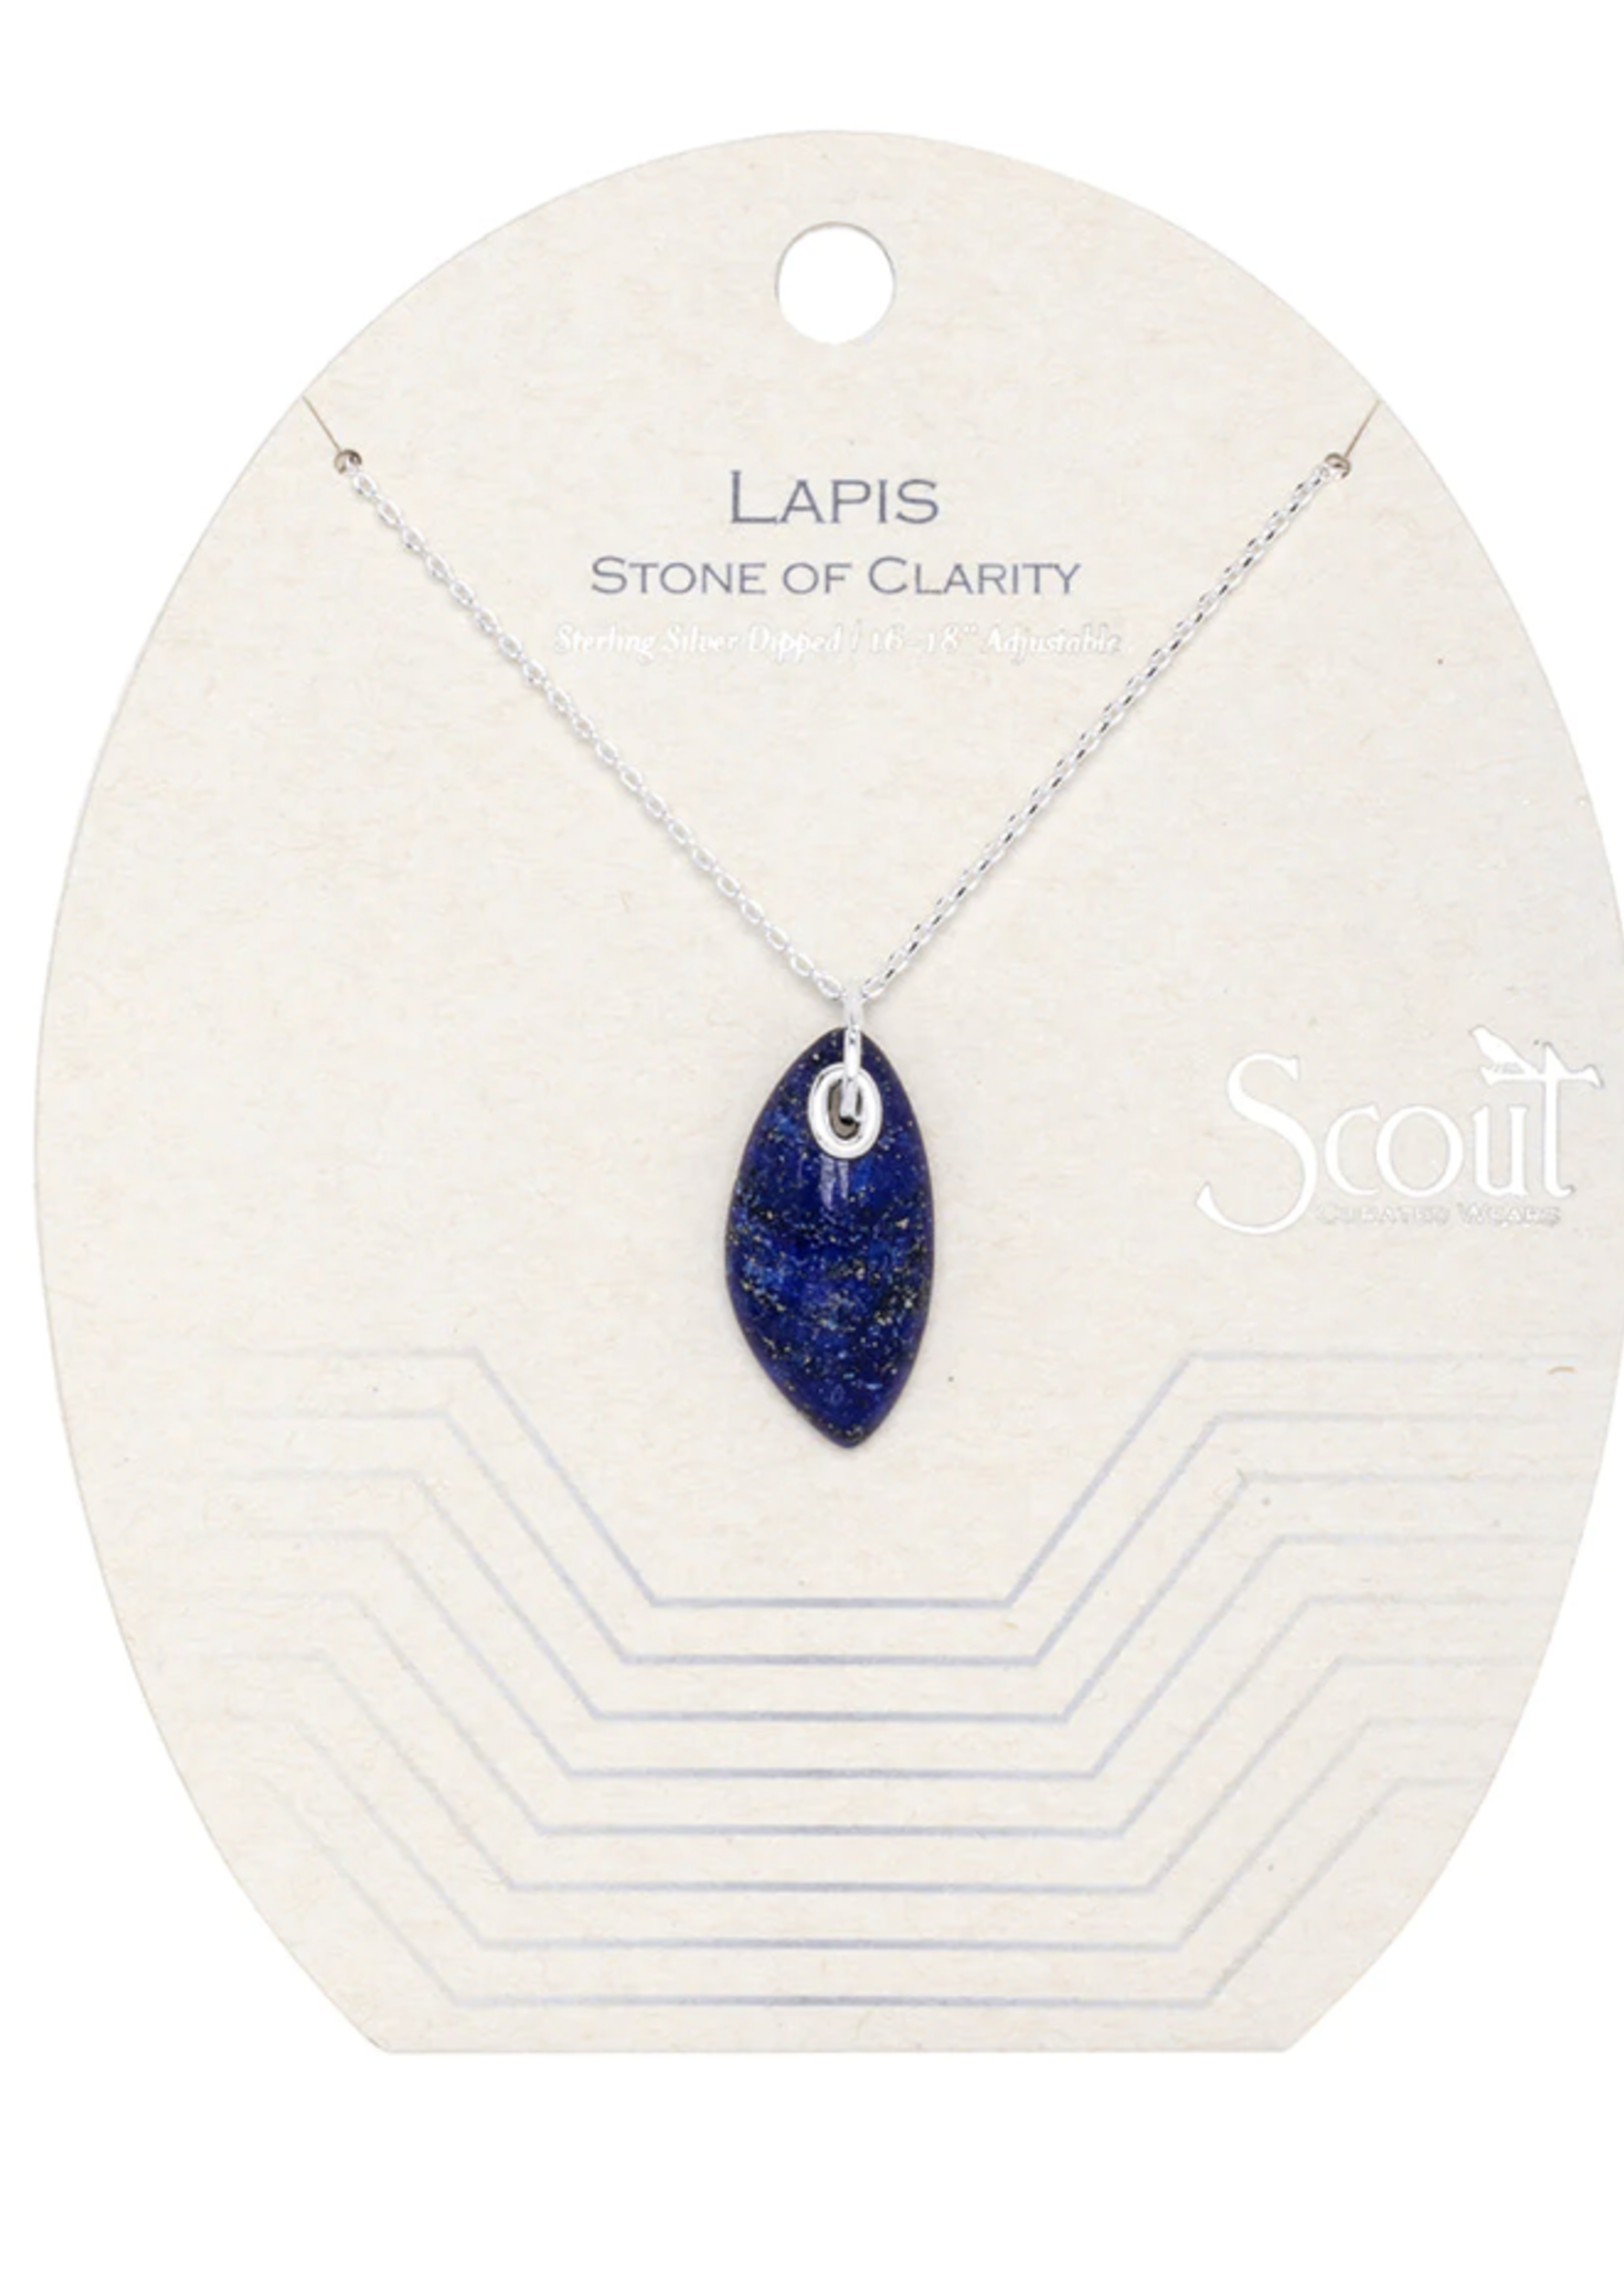 Organic Stone Necklace Lapis/Silver - Stone of Clarity